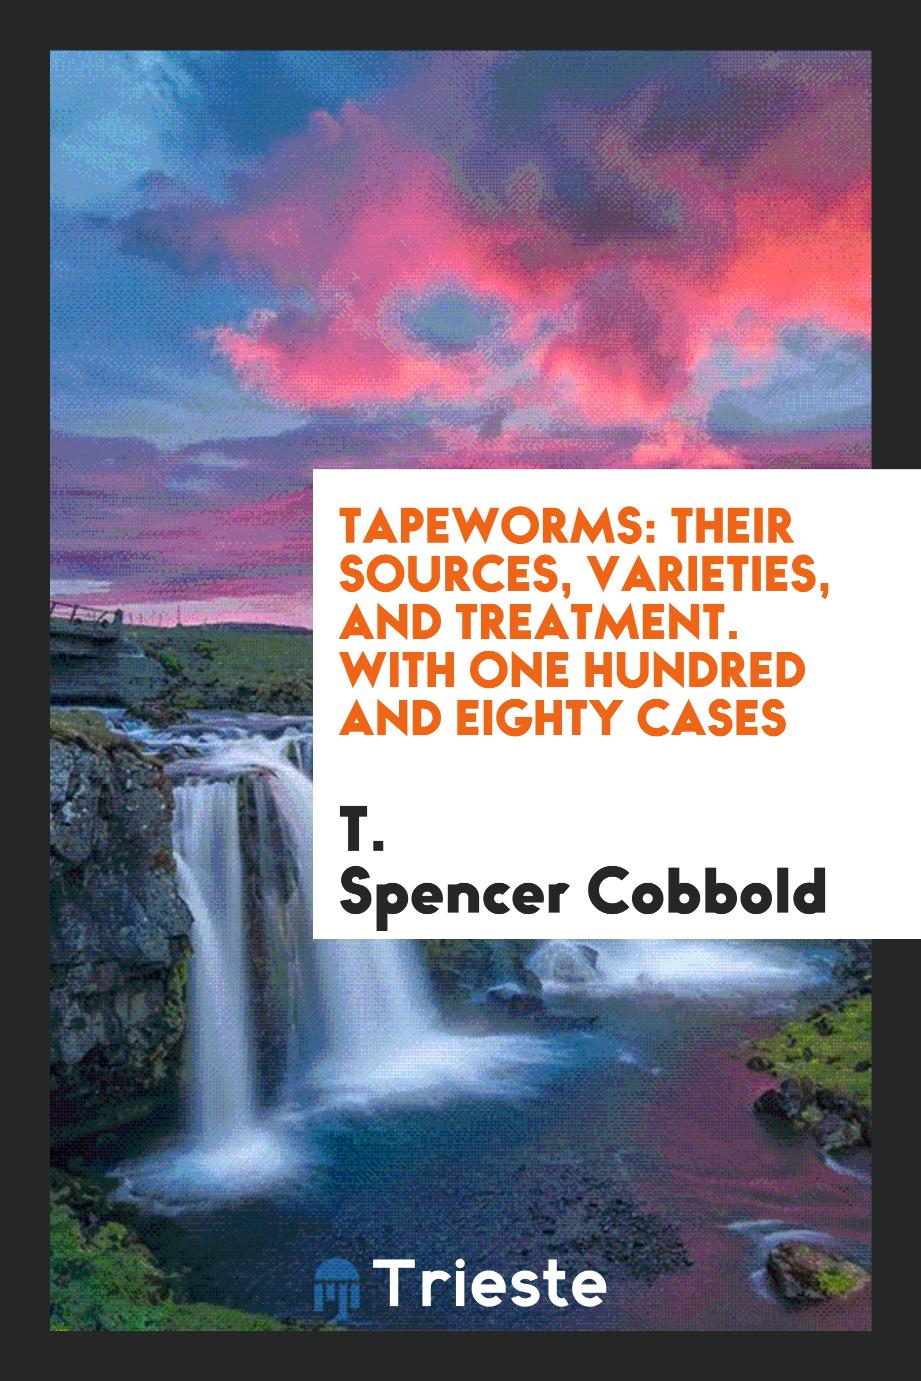 Tapeworms: Their Sources, Varieties, and Treatment. With One Hundred and Eighty Cases